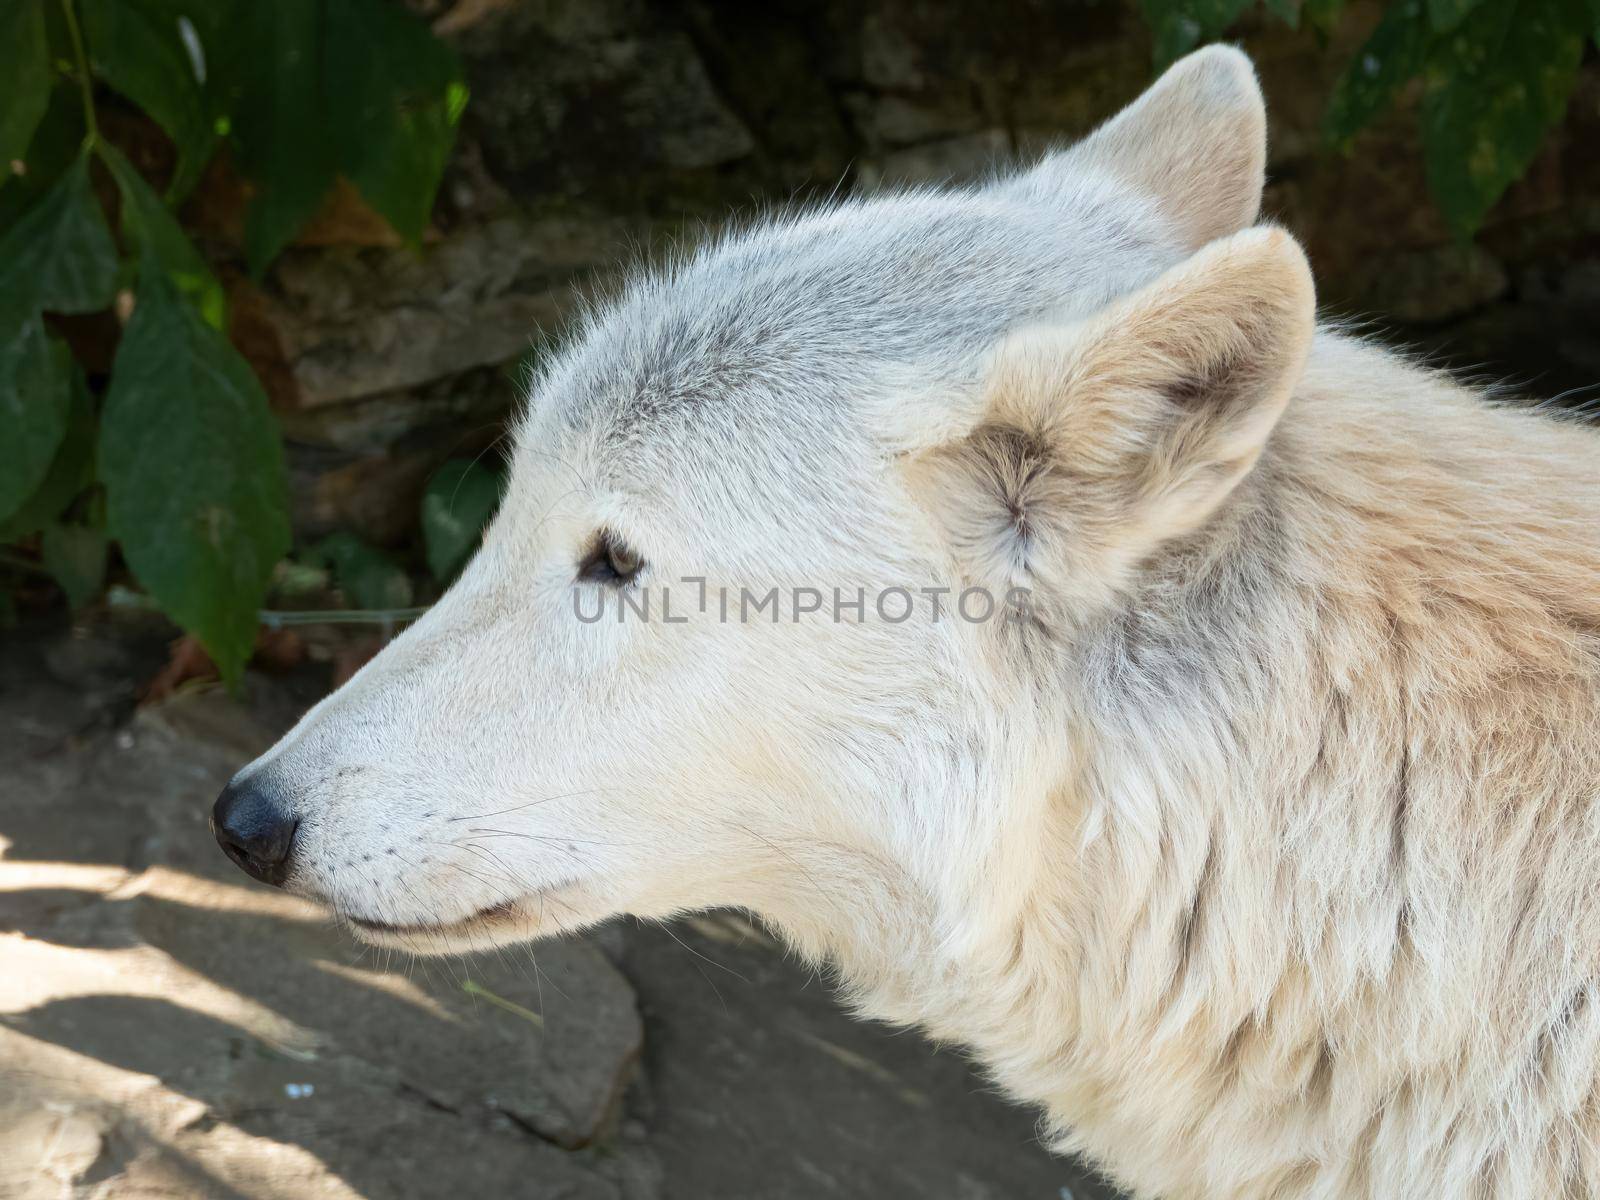 Tundra wolf (Canis lupus albus), also known as the Turukhan wolf is a subspecies of grey wolf native to Eurasia's tundra and forest-tundra zones from Finland to the Kamchatka Peninsula